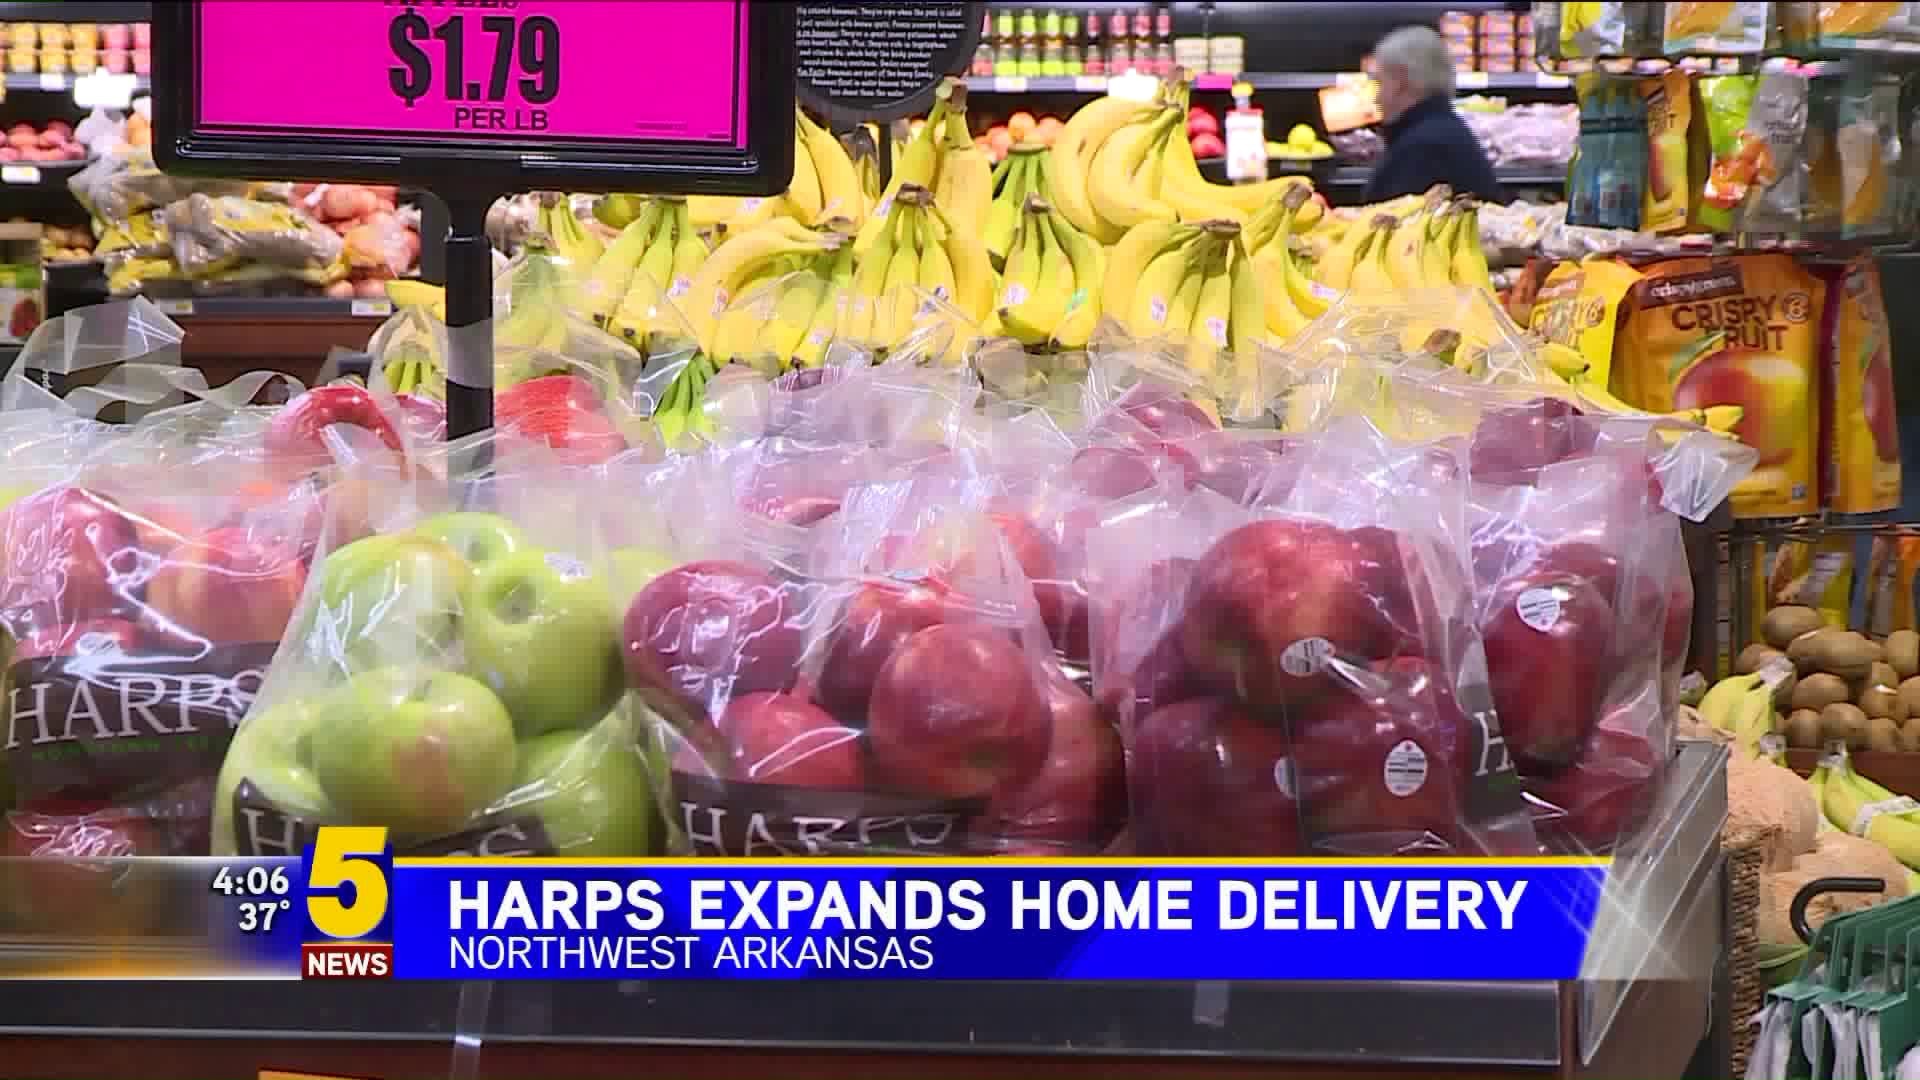 Harps Expands Home Delivery